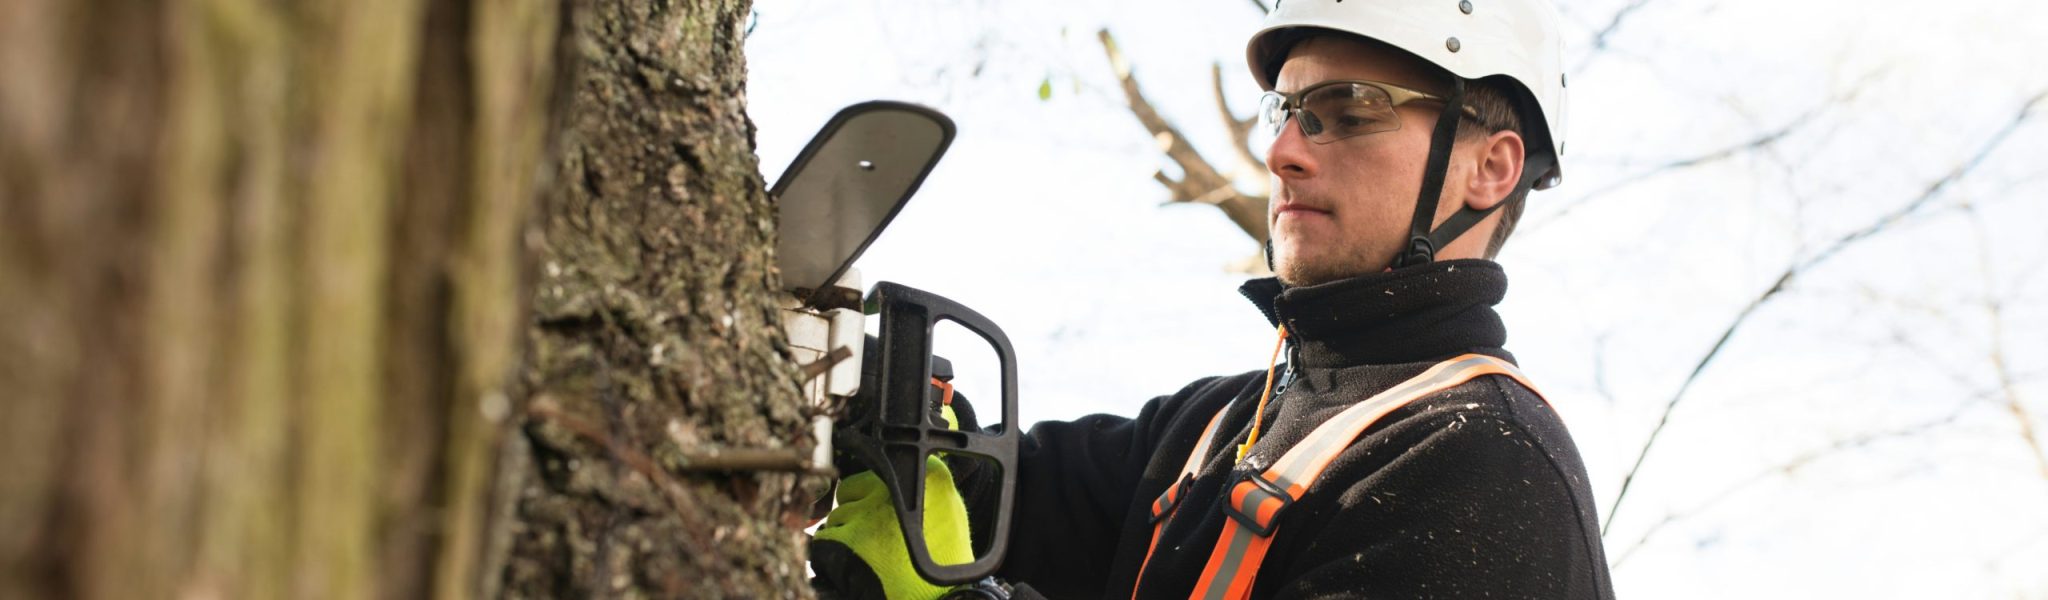 tree surgeon cuts down a tree safely using proper equipment